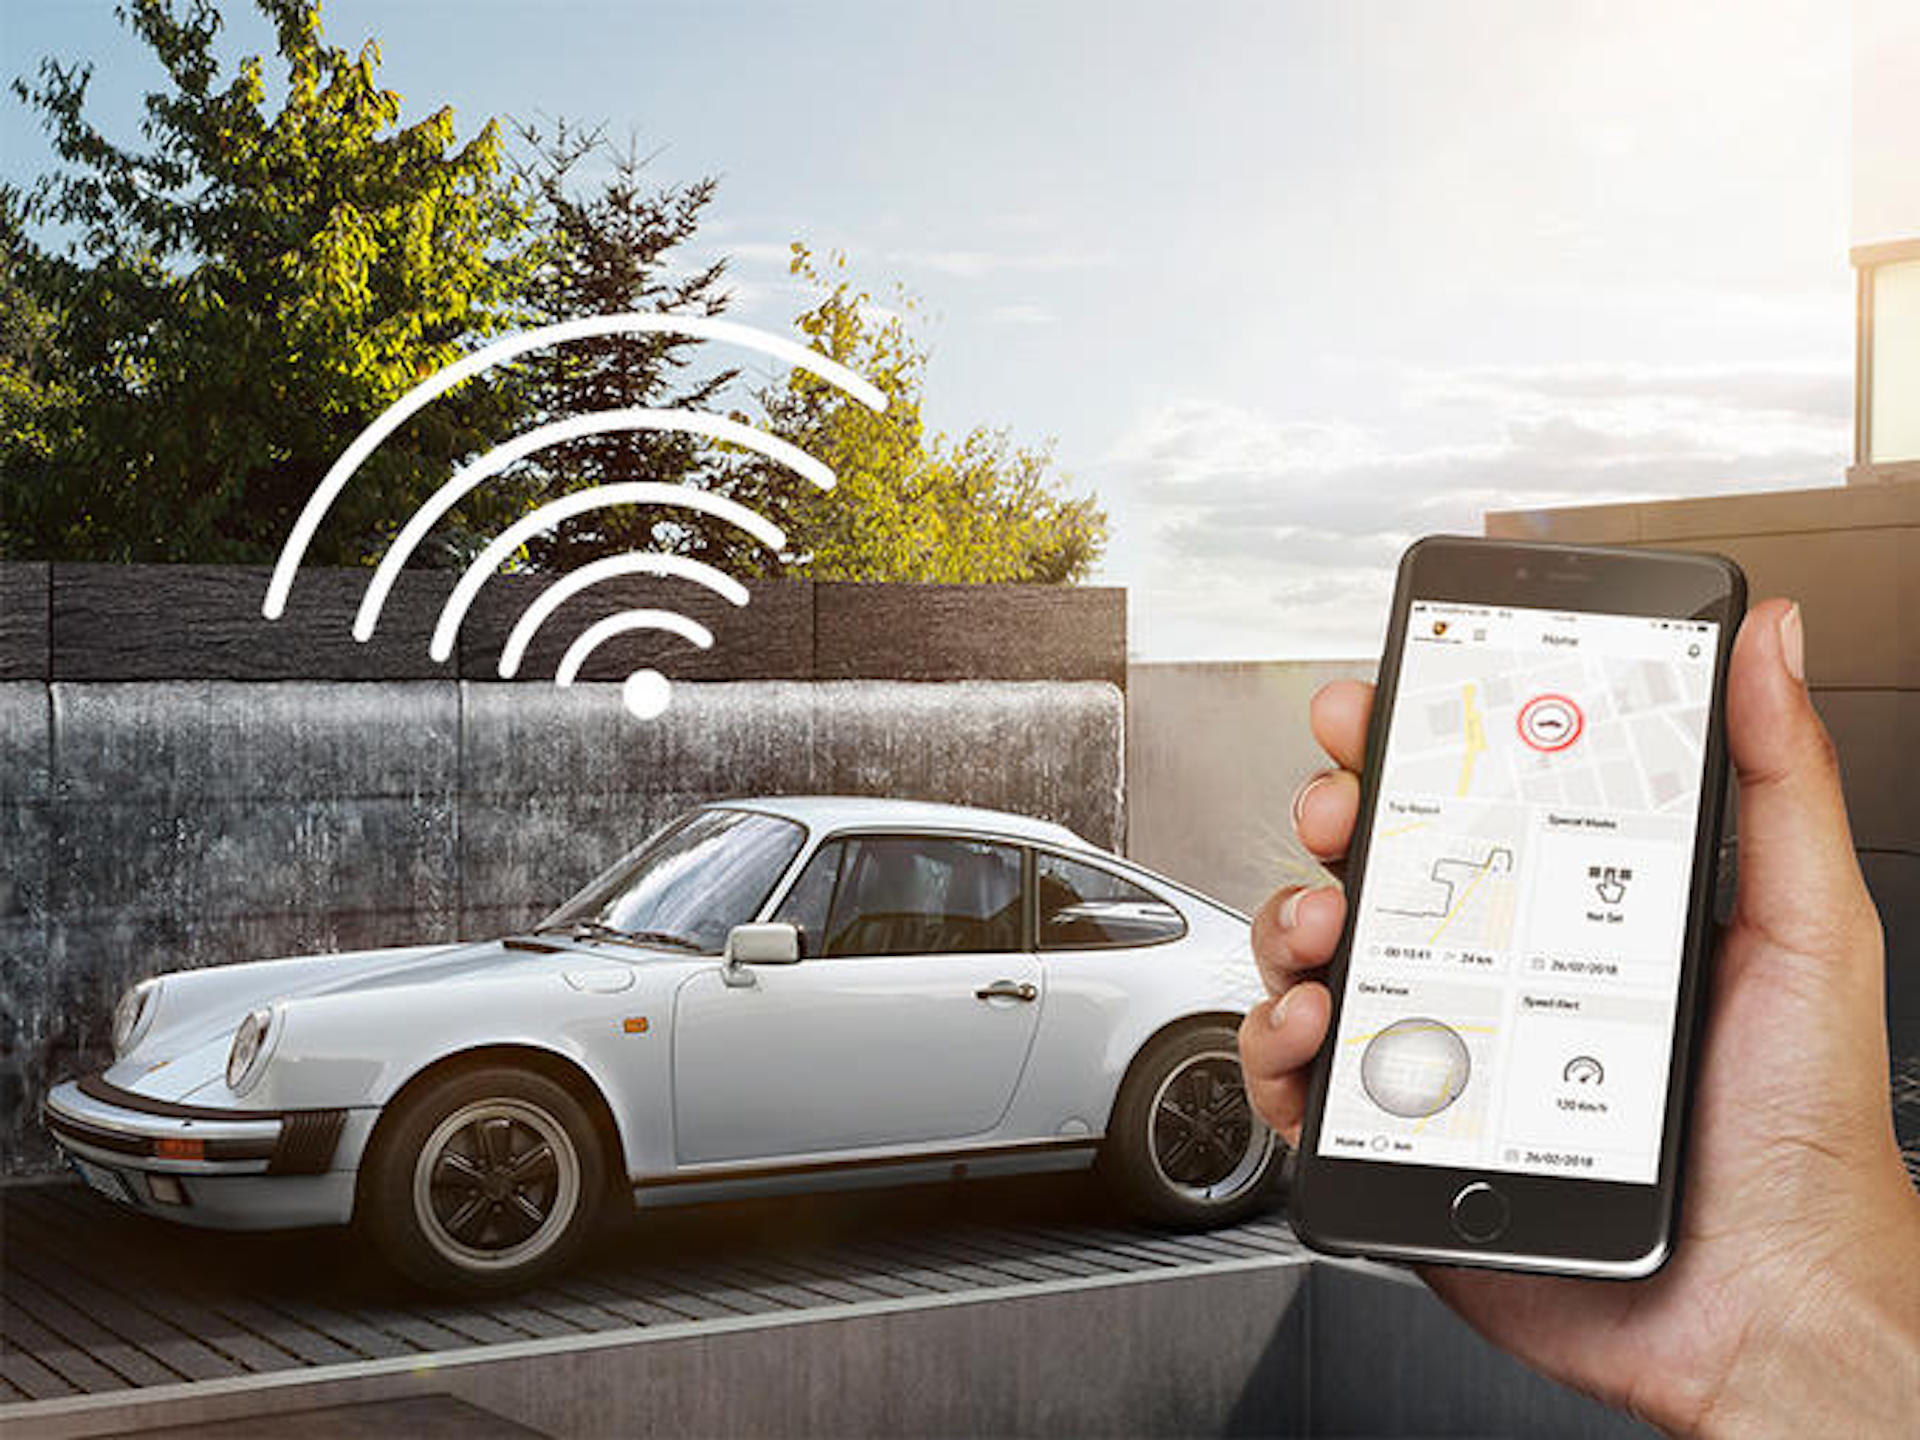 launches its own vehicle tracking system to protect